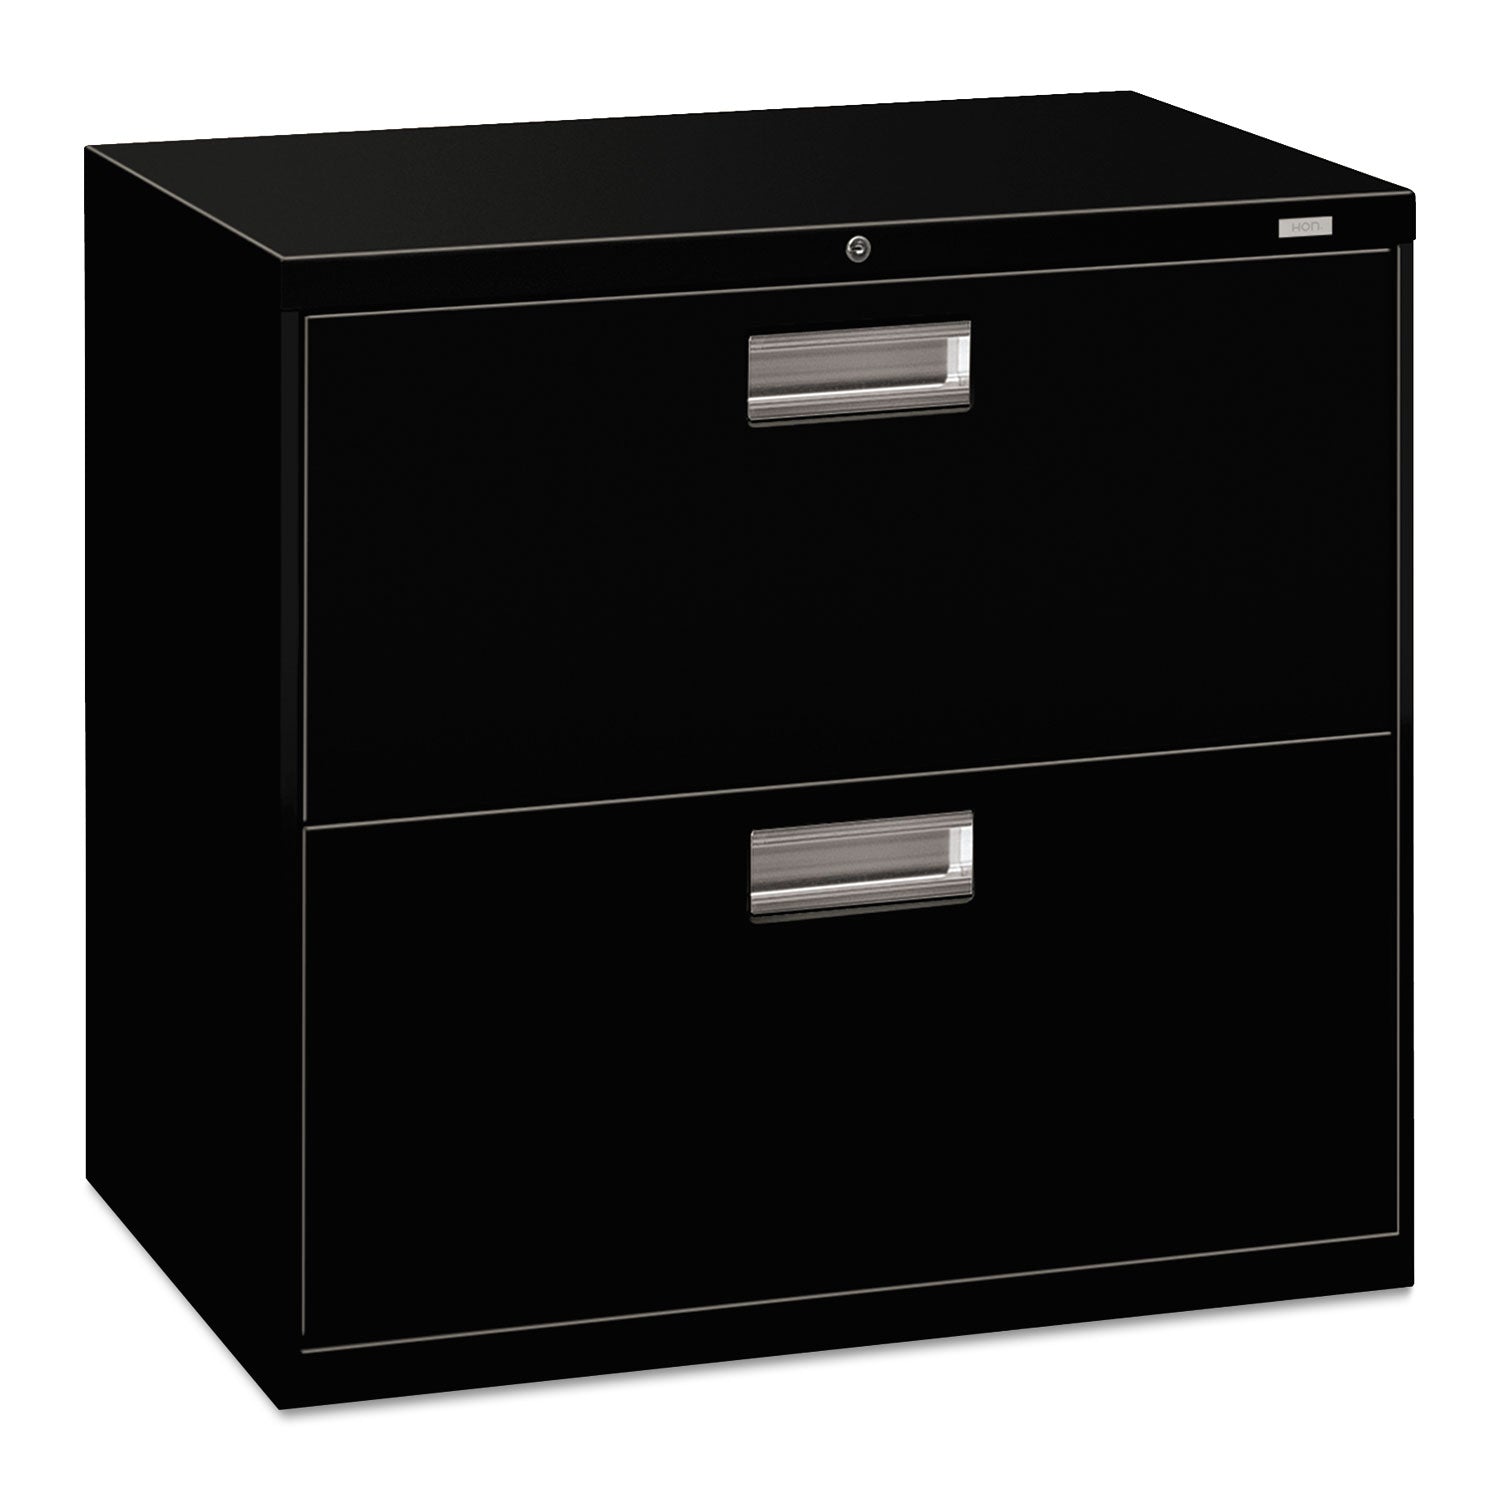 Brigade 600 Series Lateral File, 2 Legal/Letter-Size File Drawers, Black, 30" x 18" x 28 - 